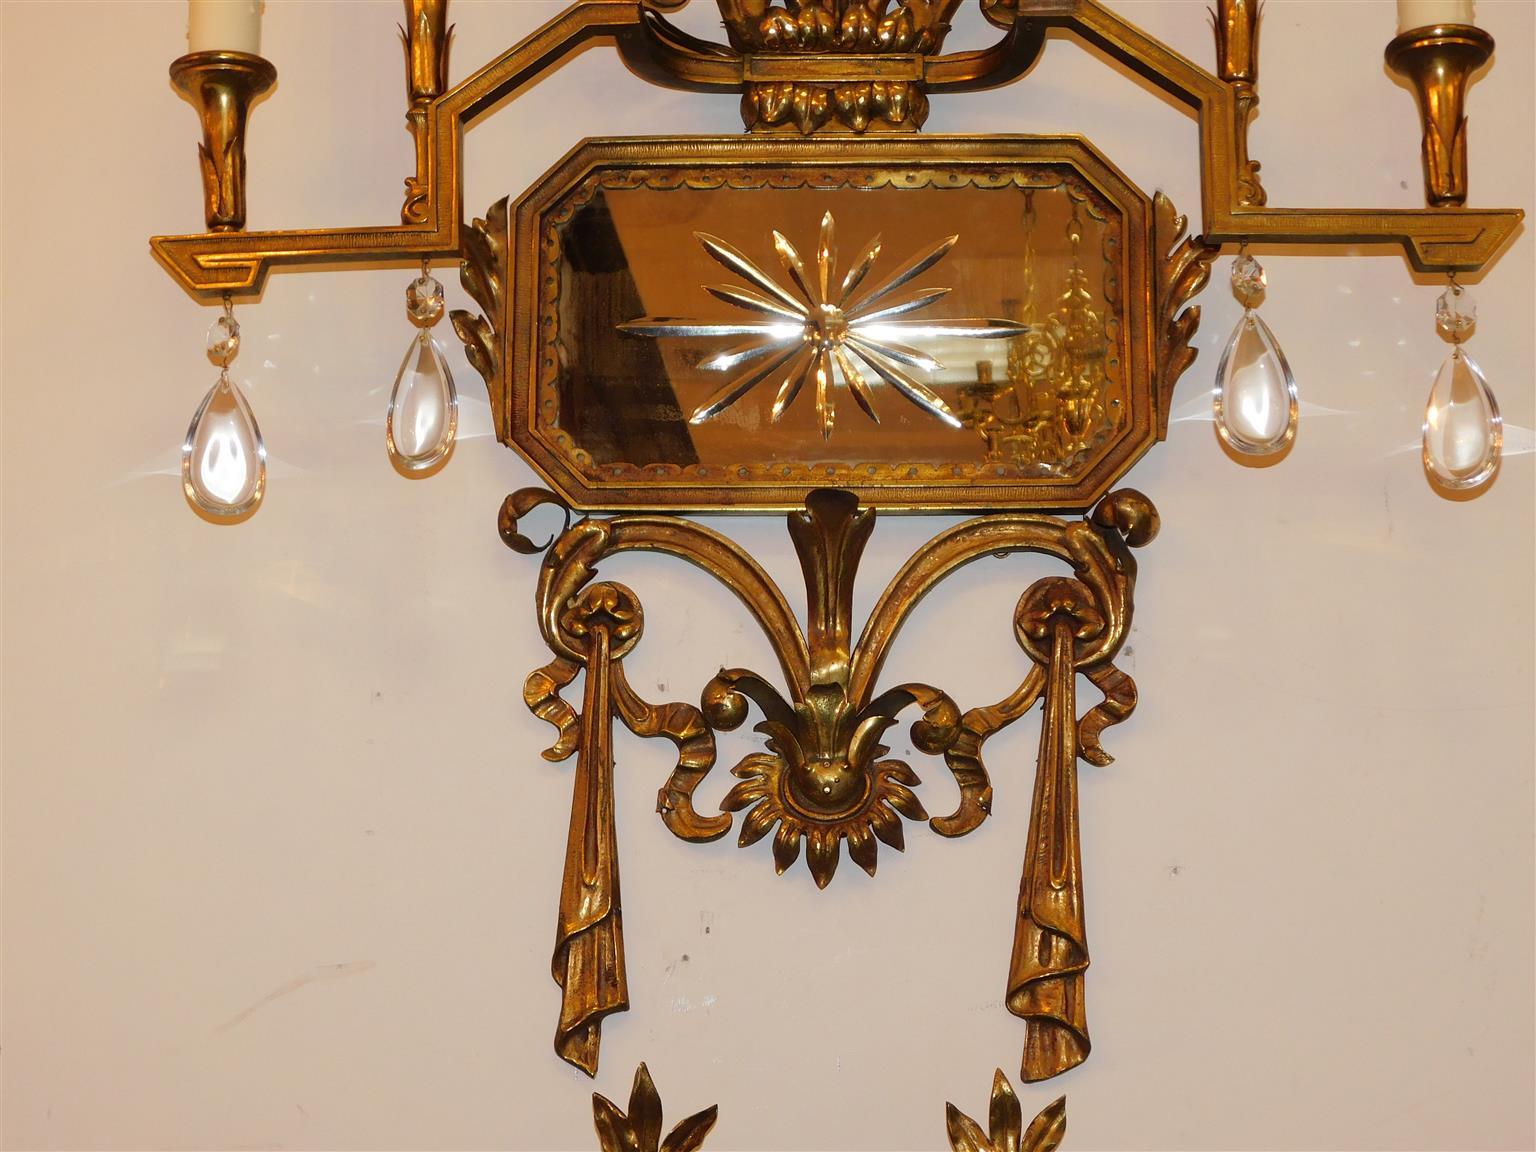 Pair of American Gilt Bronze & Star Mirrored Wall Sconces, Caldwell & Co. C 1870 For Sale 2